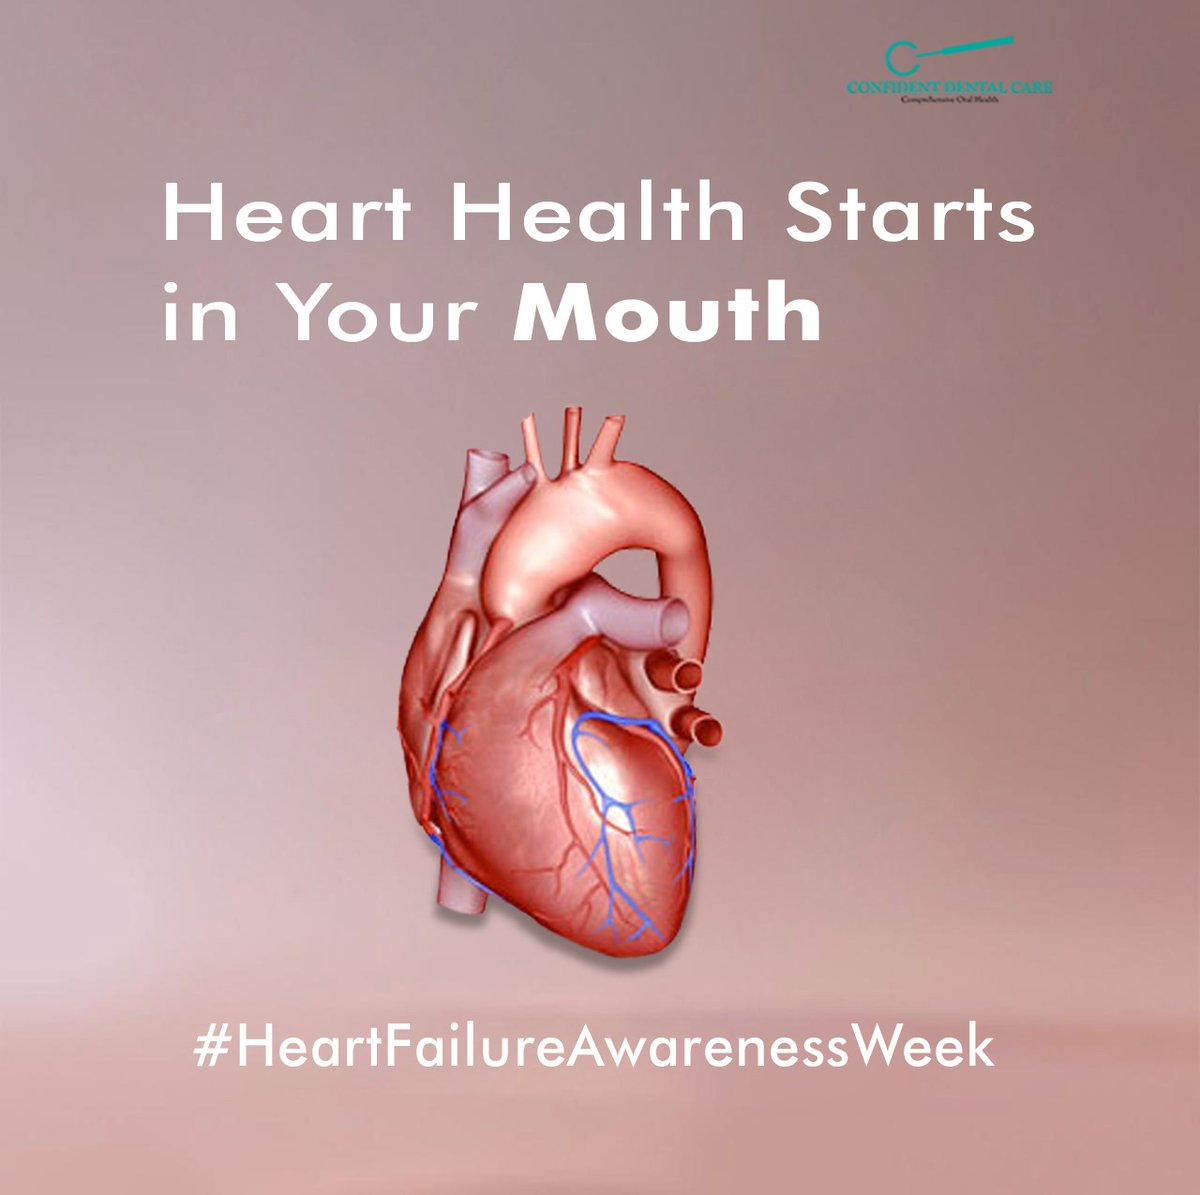 Promoting heart and oral health awareness in Bangalore with the best dental care. #HeartHealth #OralHealth #PreventionIsKey #HealthyLiving #BangaloreDentist #DentalCare #HealthyHabits #WellnessWednesday #HeartAwareness #BrushAndFloss #HealthyTeeth #HeartDiseasePrevention #Healthy